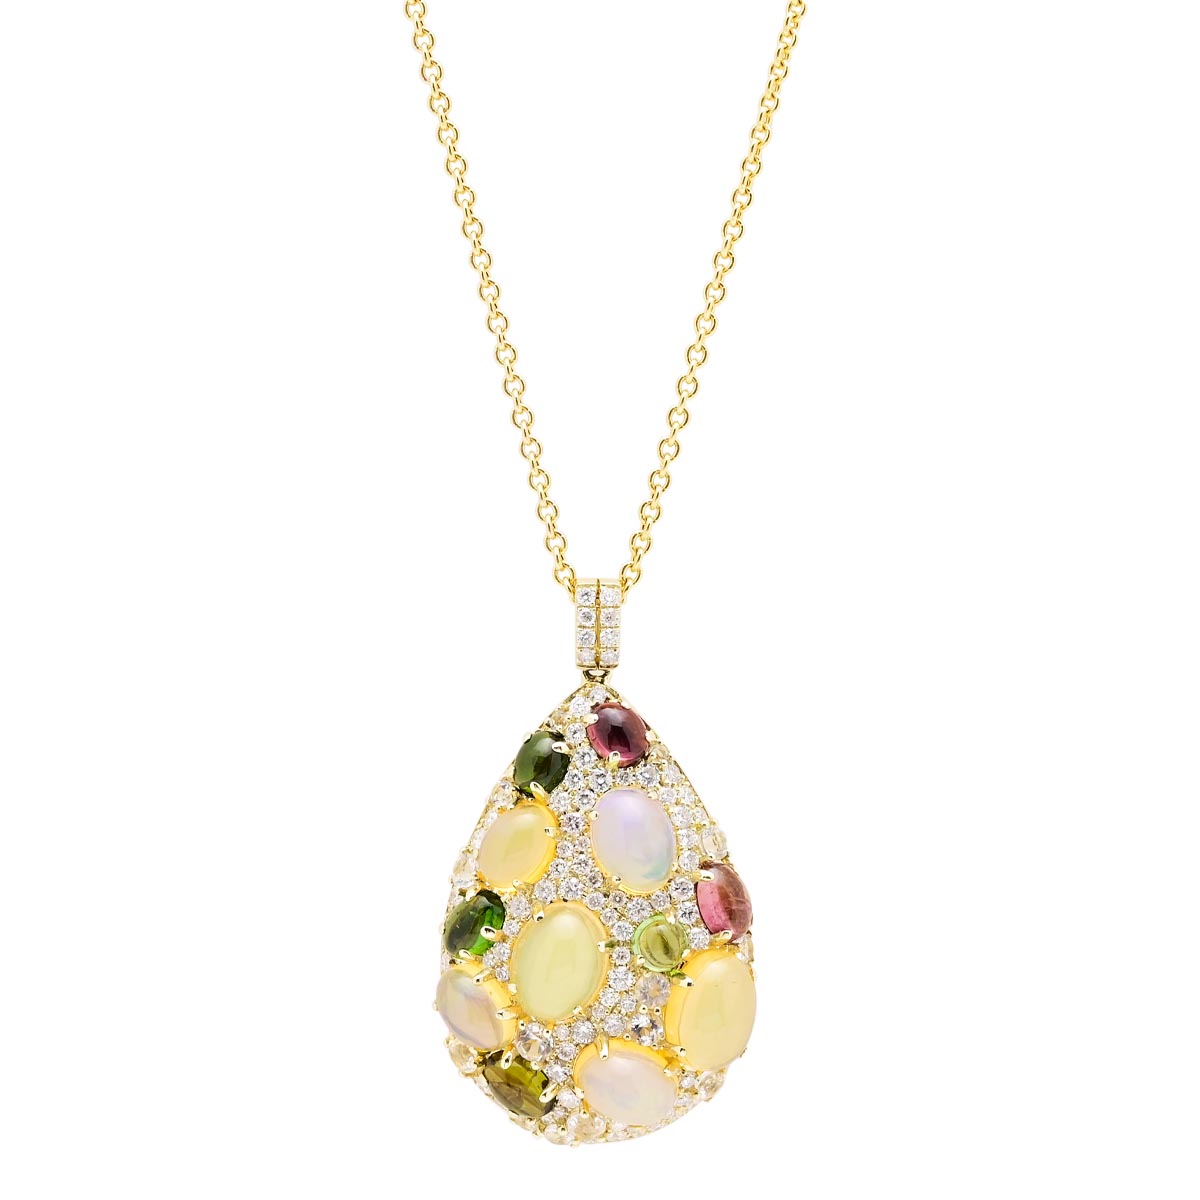 Dabakarov Oval Opal and Multicolor Tourmaline and White Quartz Necklace in 14kt Yellow Gold with Diamonds (1 1/5ct tw)